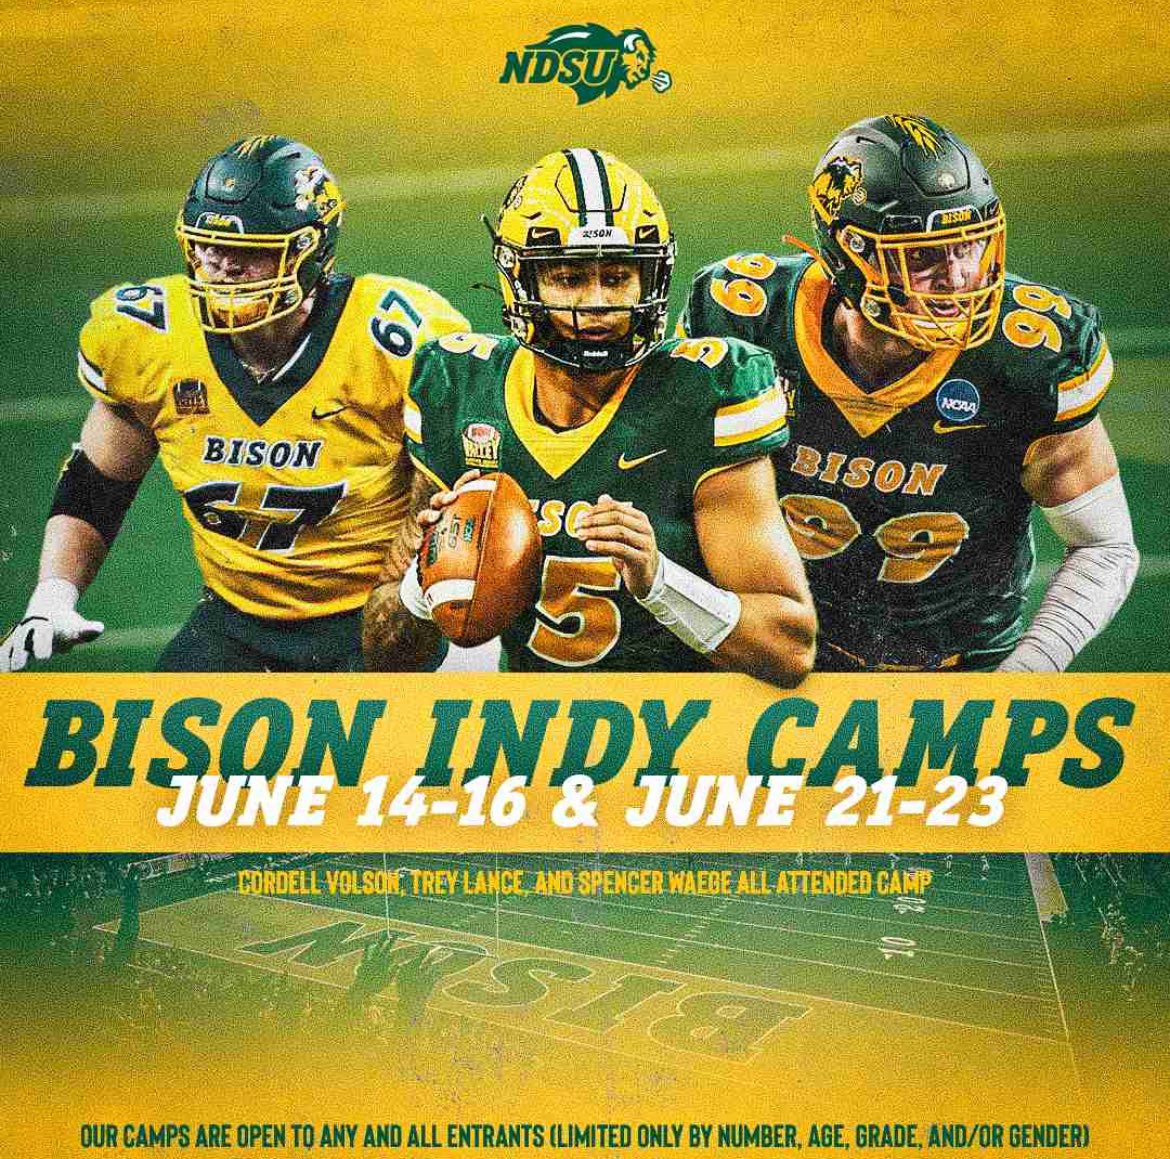 Thank you for the invitation 💚 @NDSUfbCamp